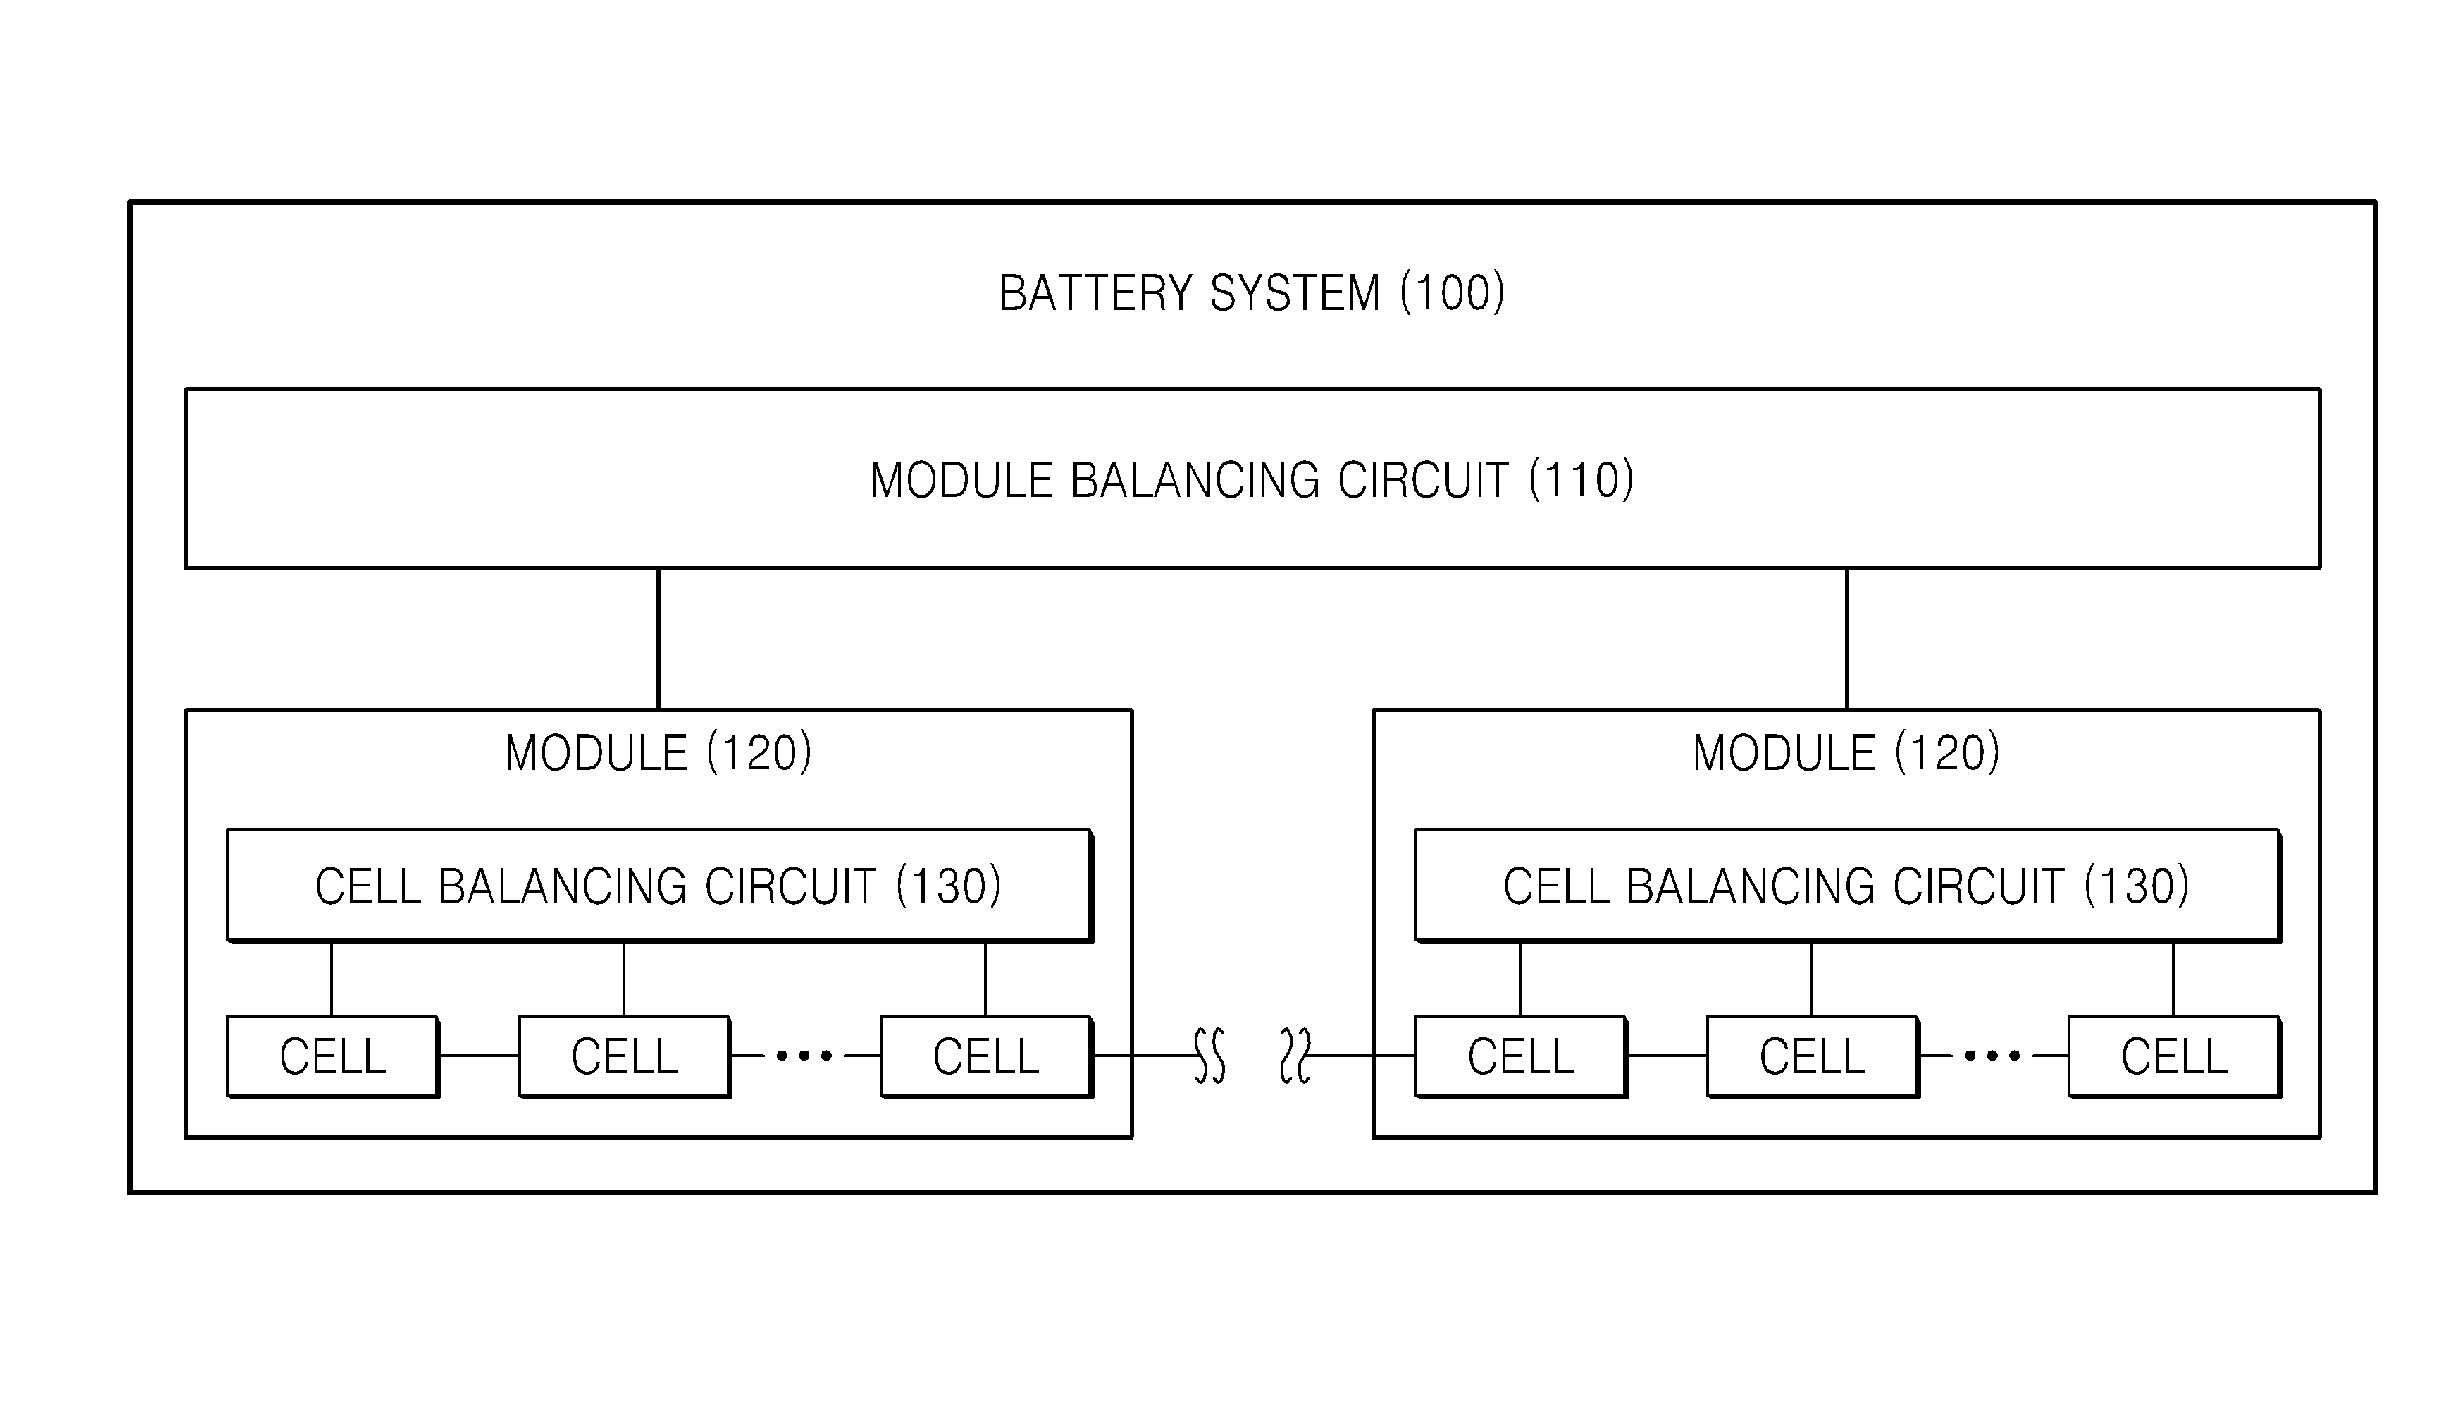 Balancing method and battery system